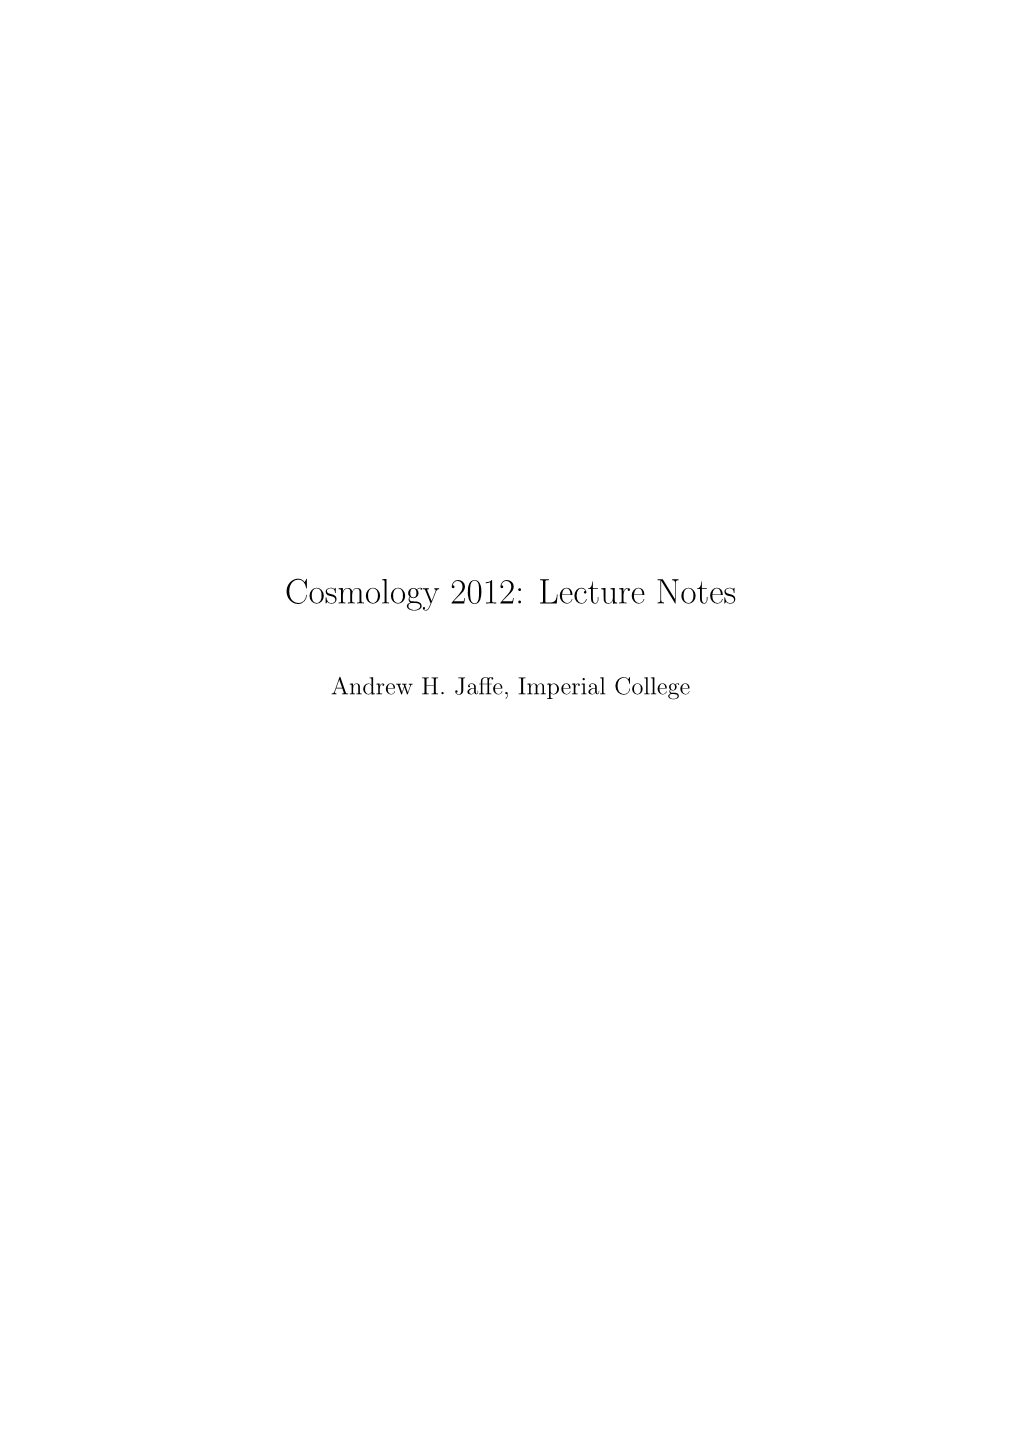 Cosmology 2012: Lecture Notes